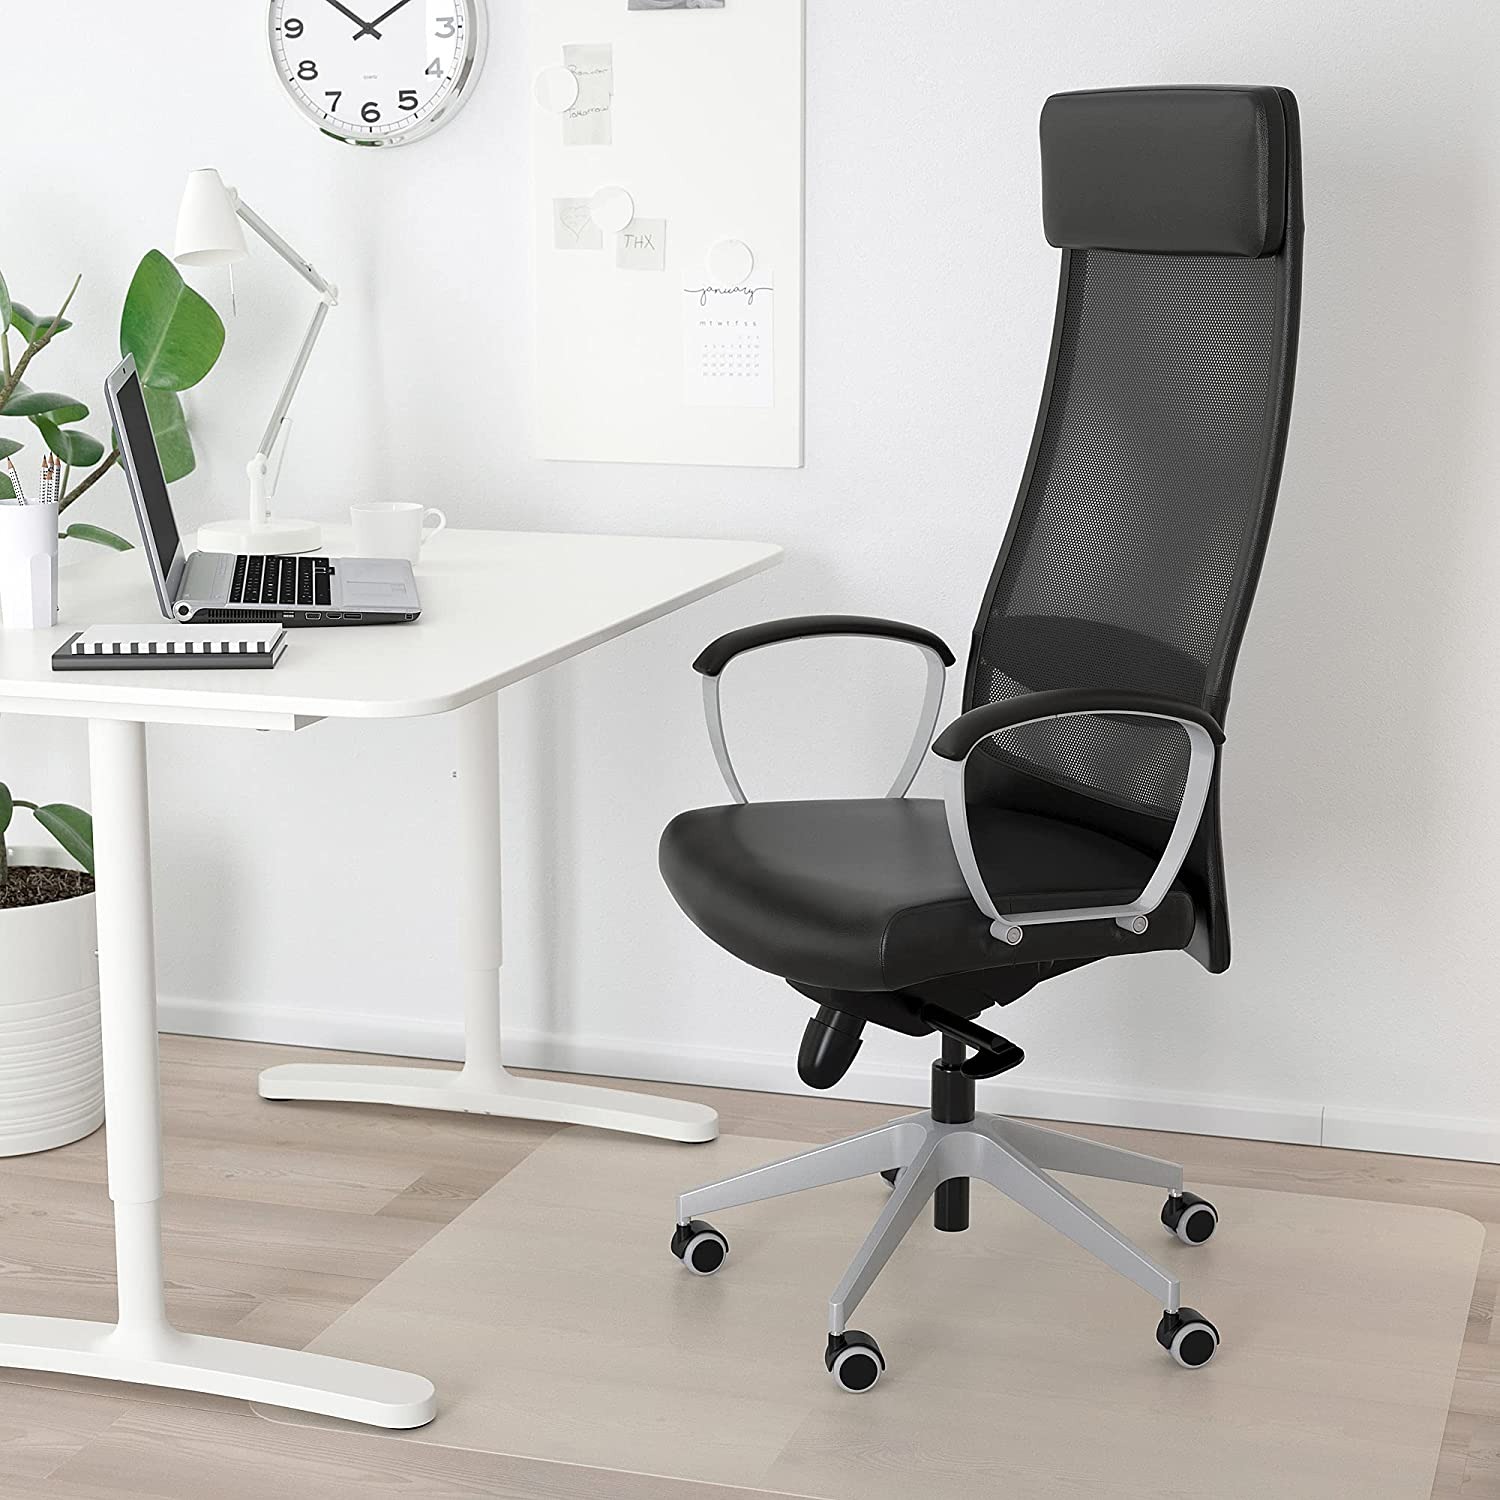 What Is the Best Stylish Office Chair?